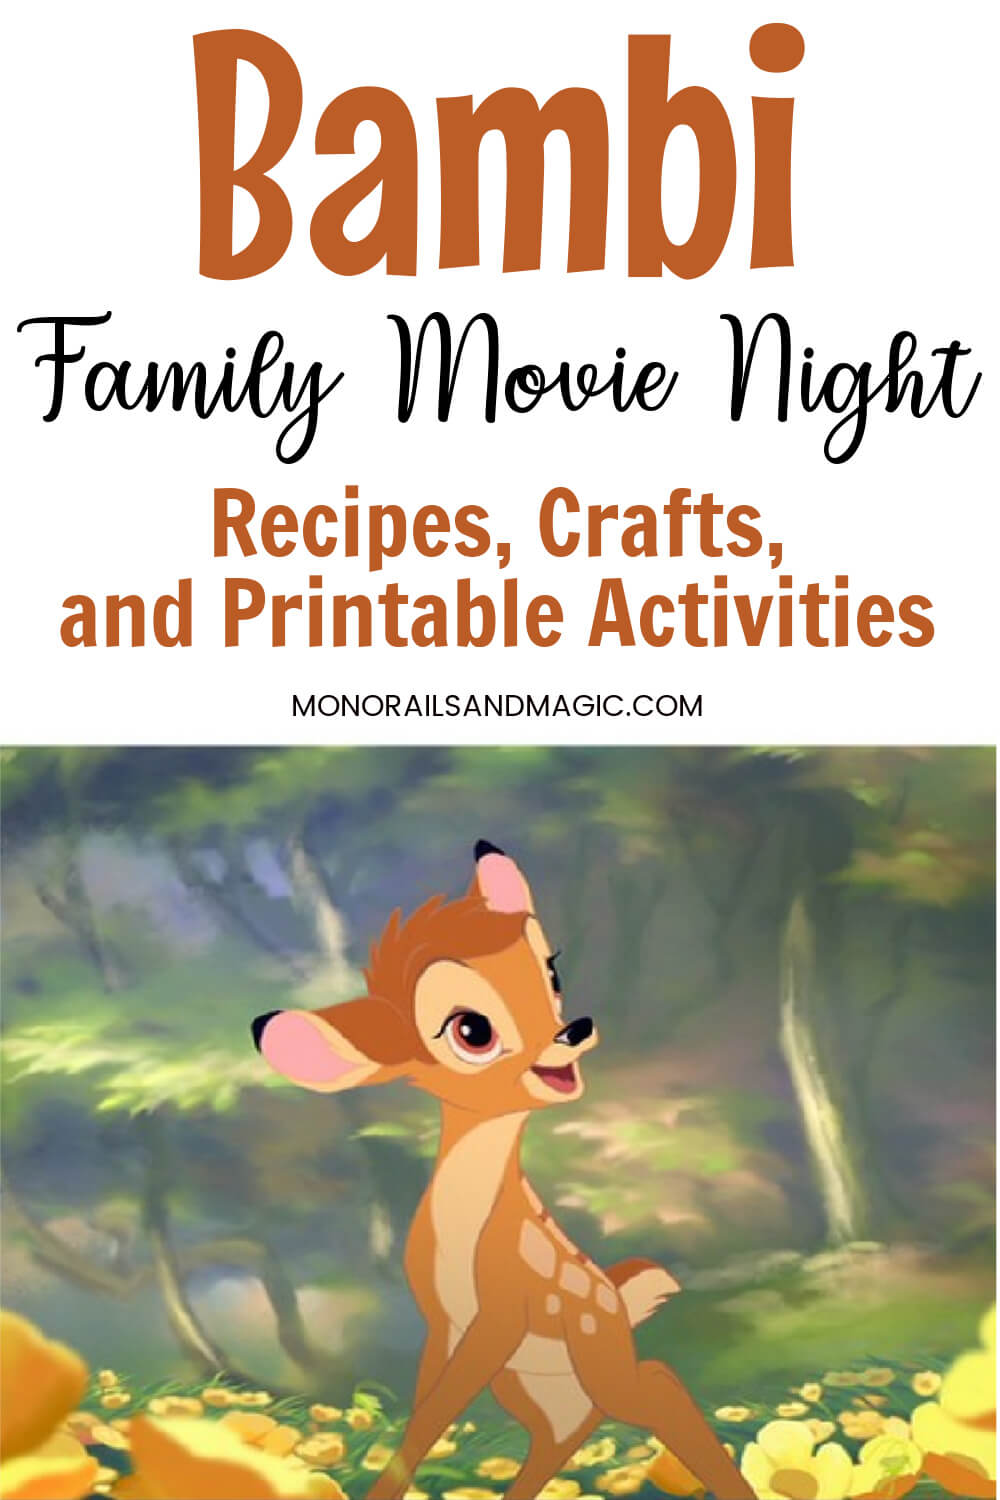 Recipes, crafts, and printable activities for a Bambi family movie night.